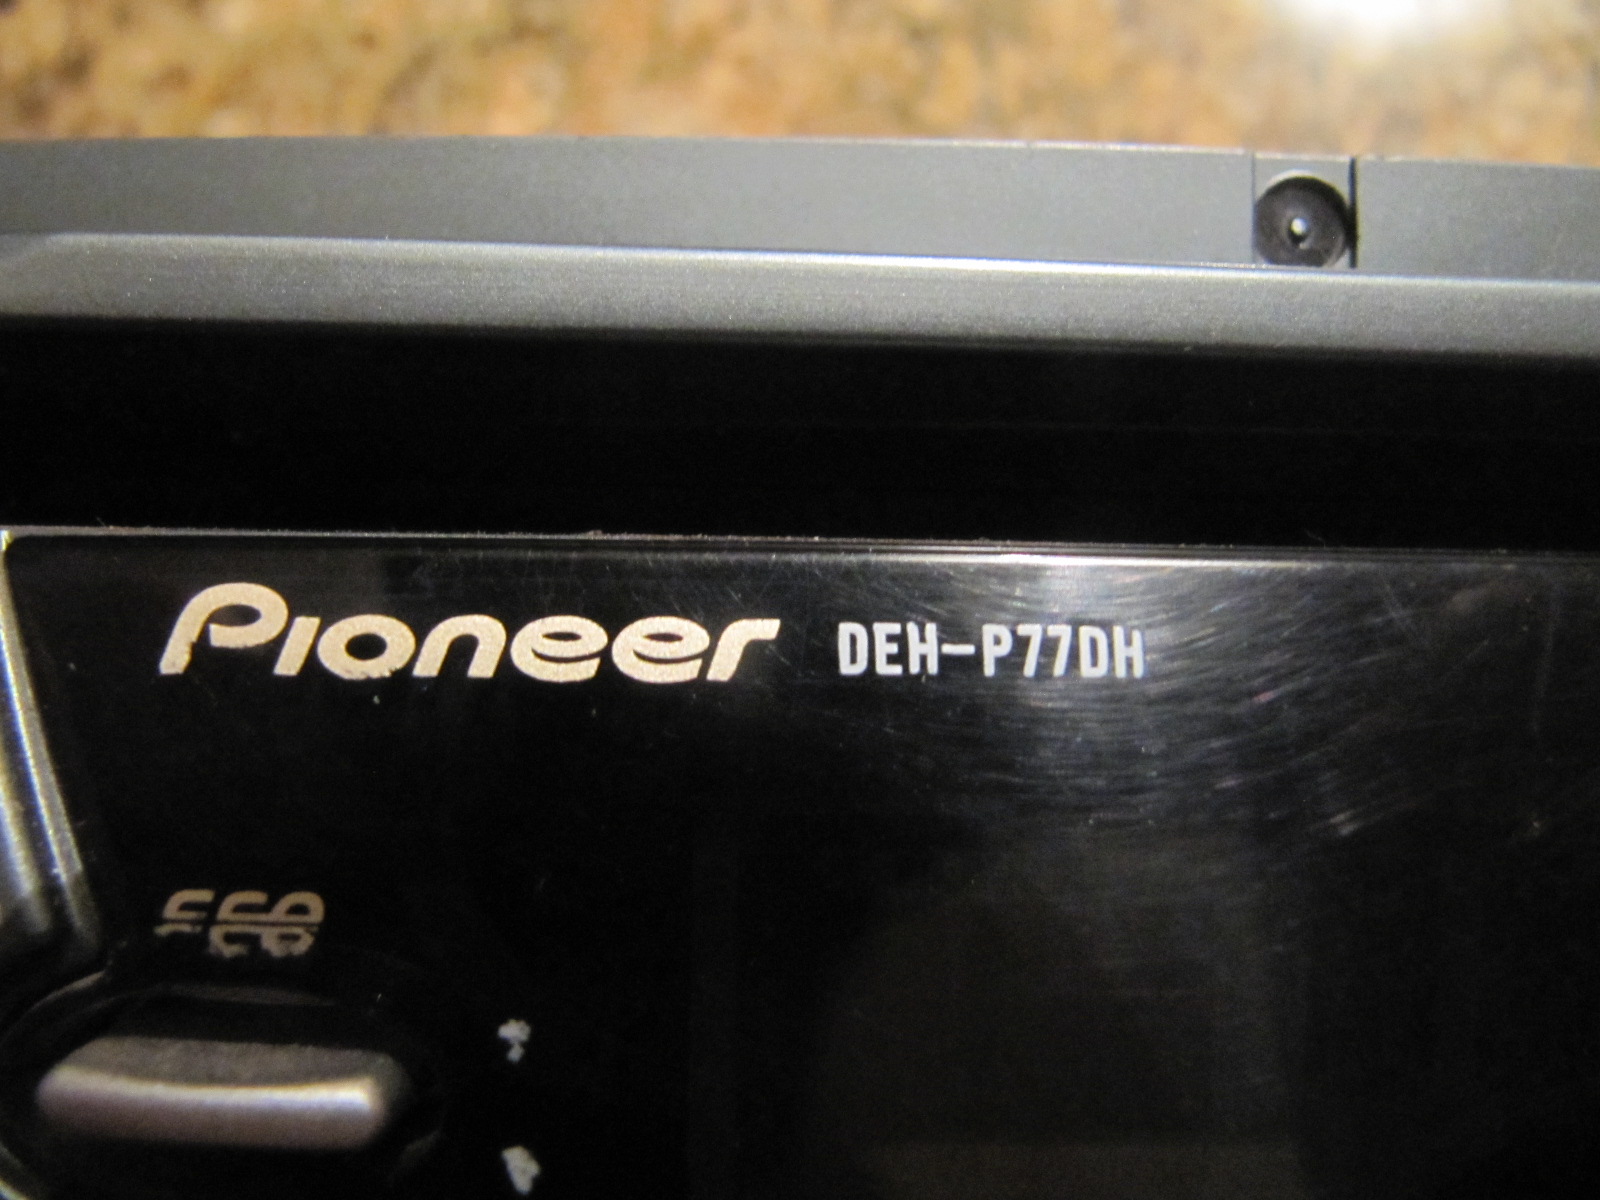 Pioneer Deh-p77dh 1 5 Din